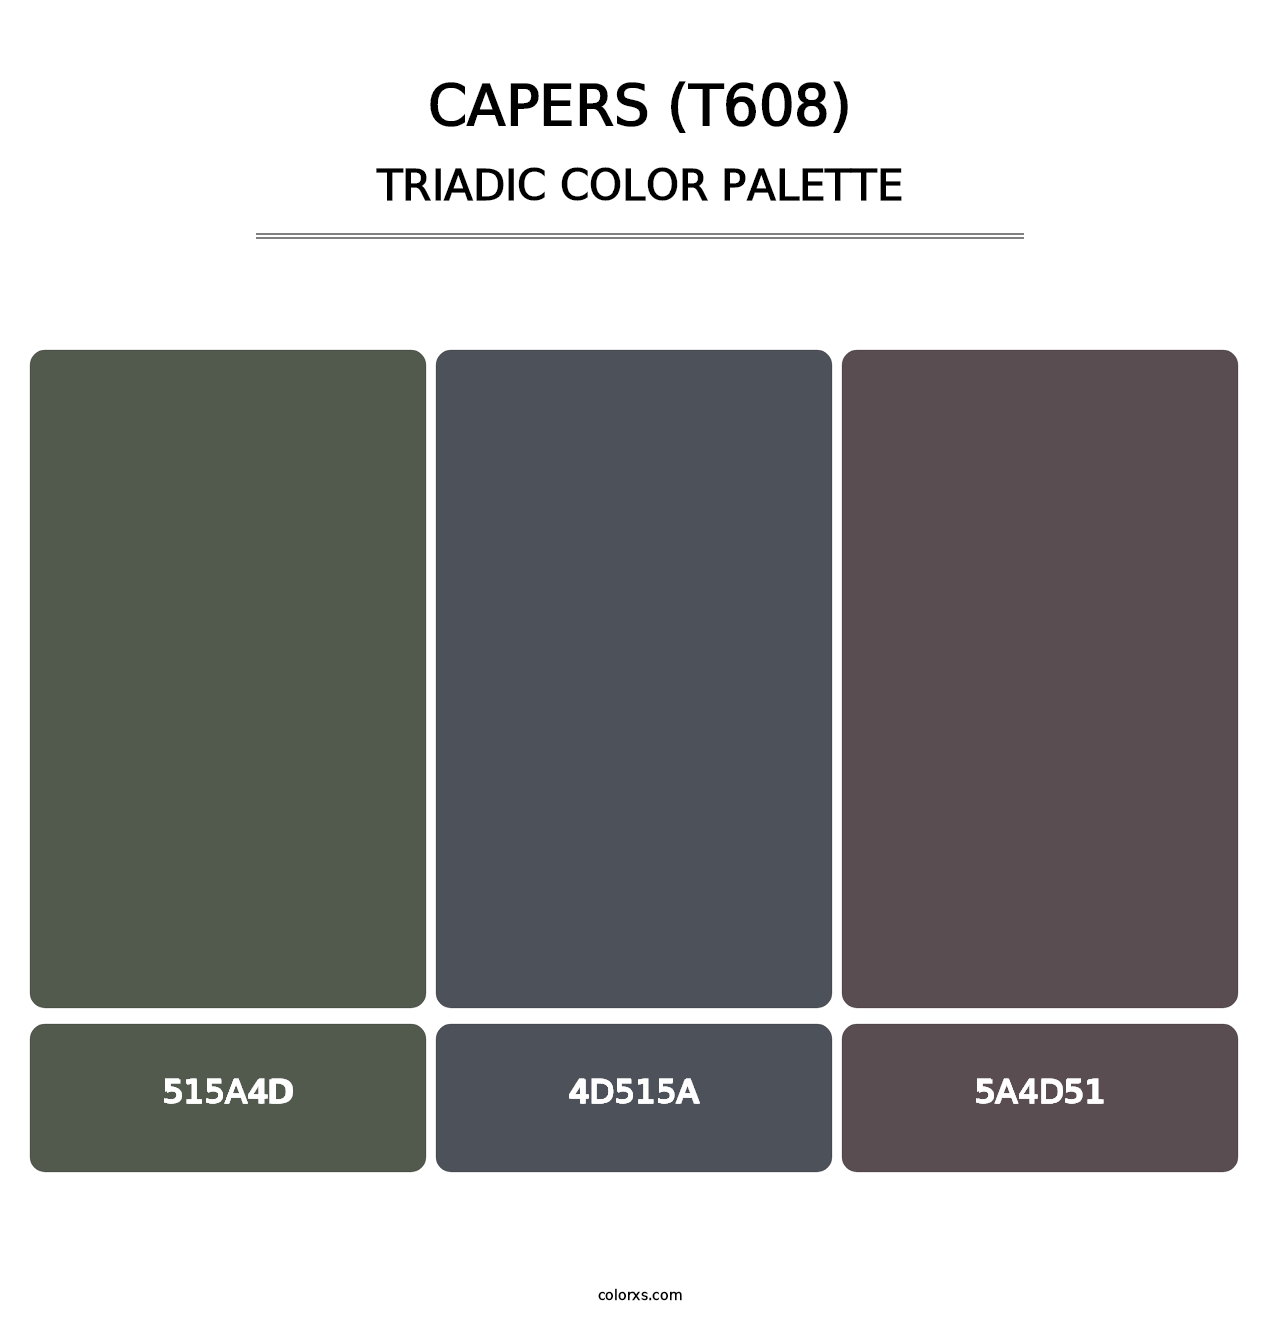 Capers (T608) - Triadic Color Palette